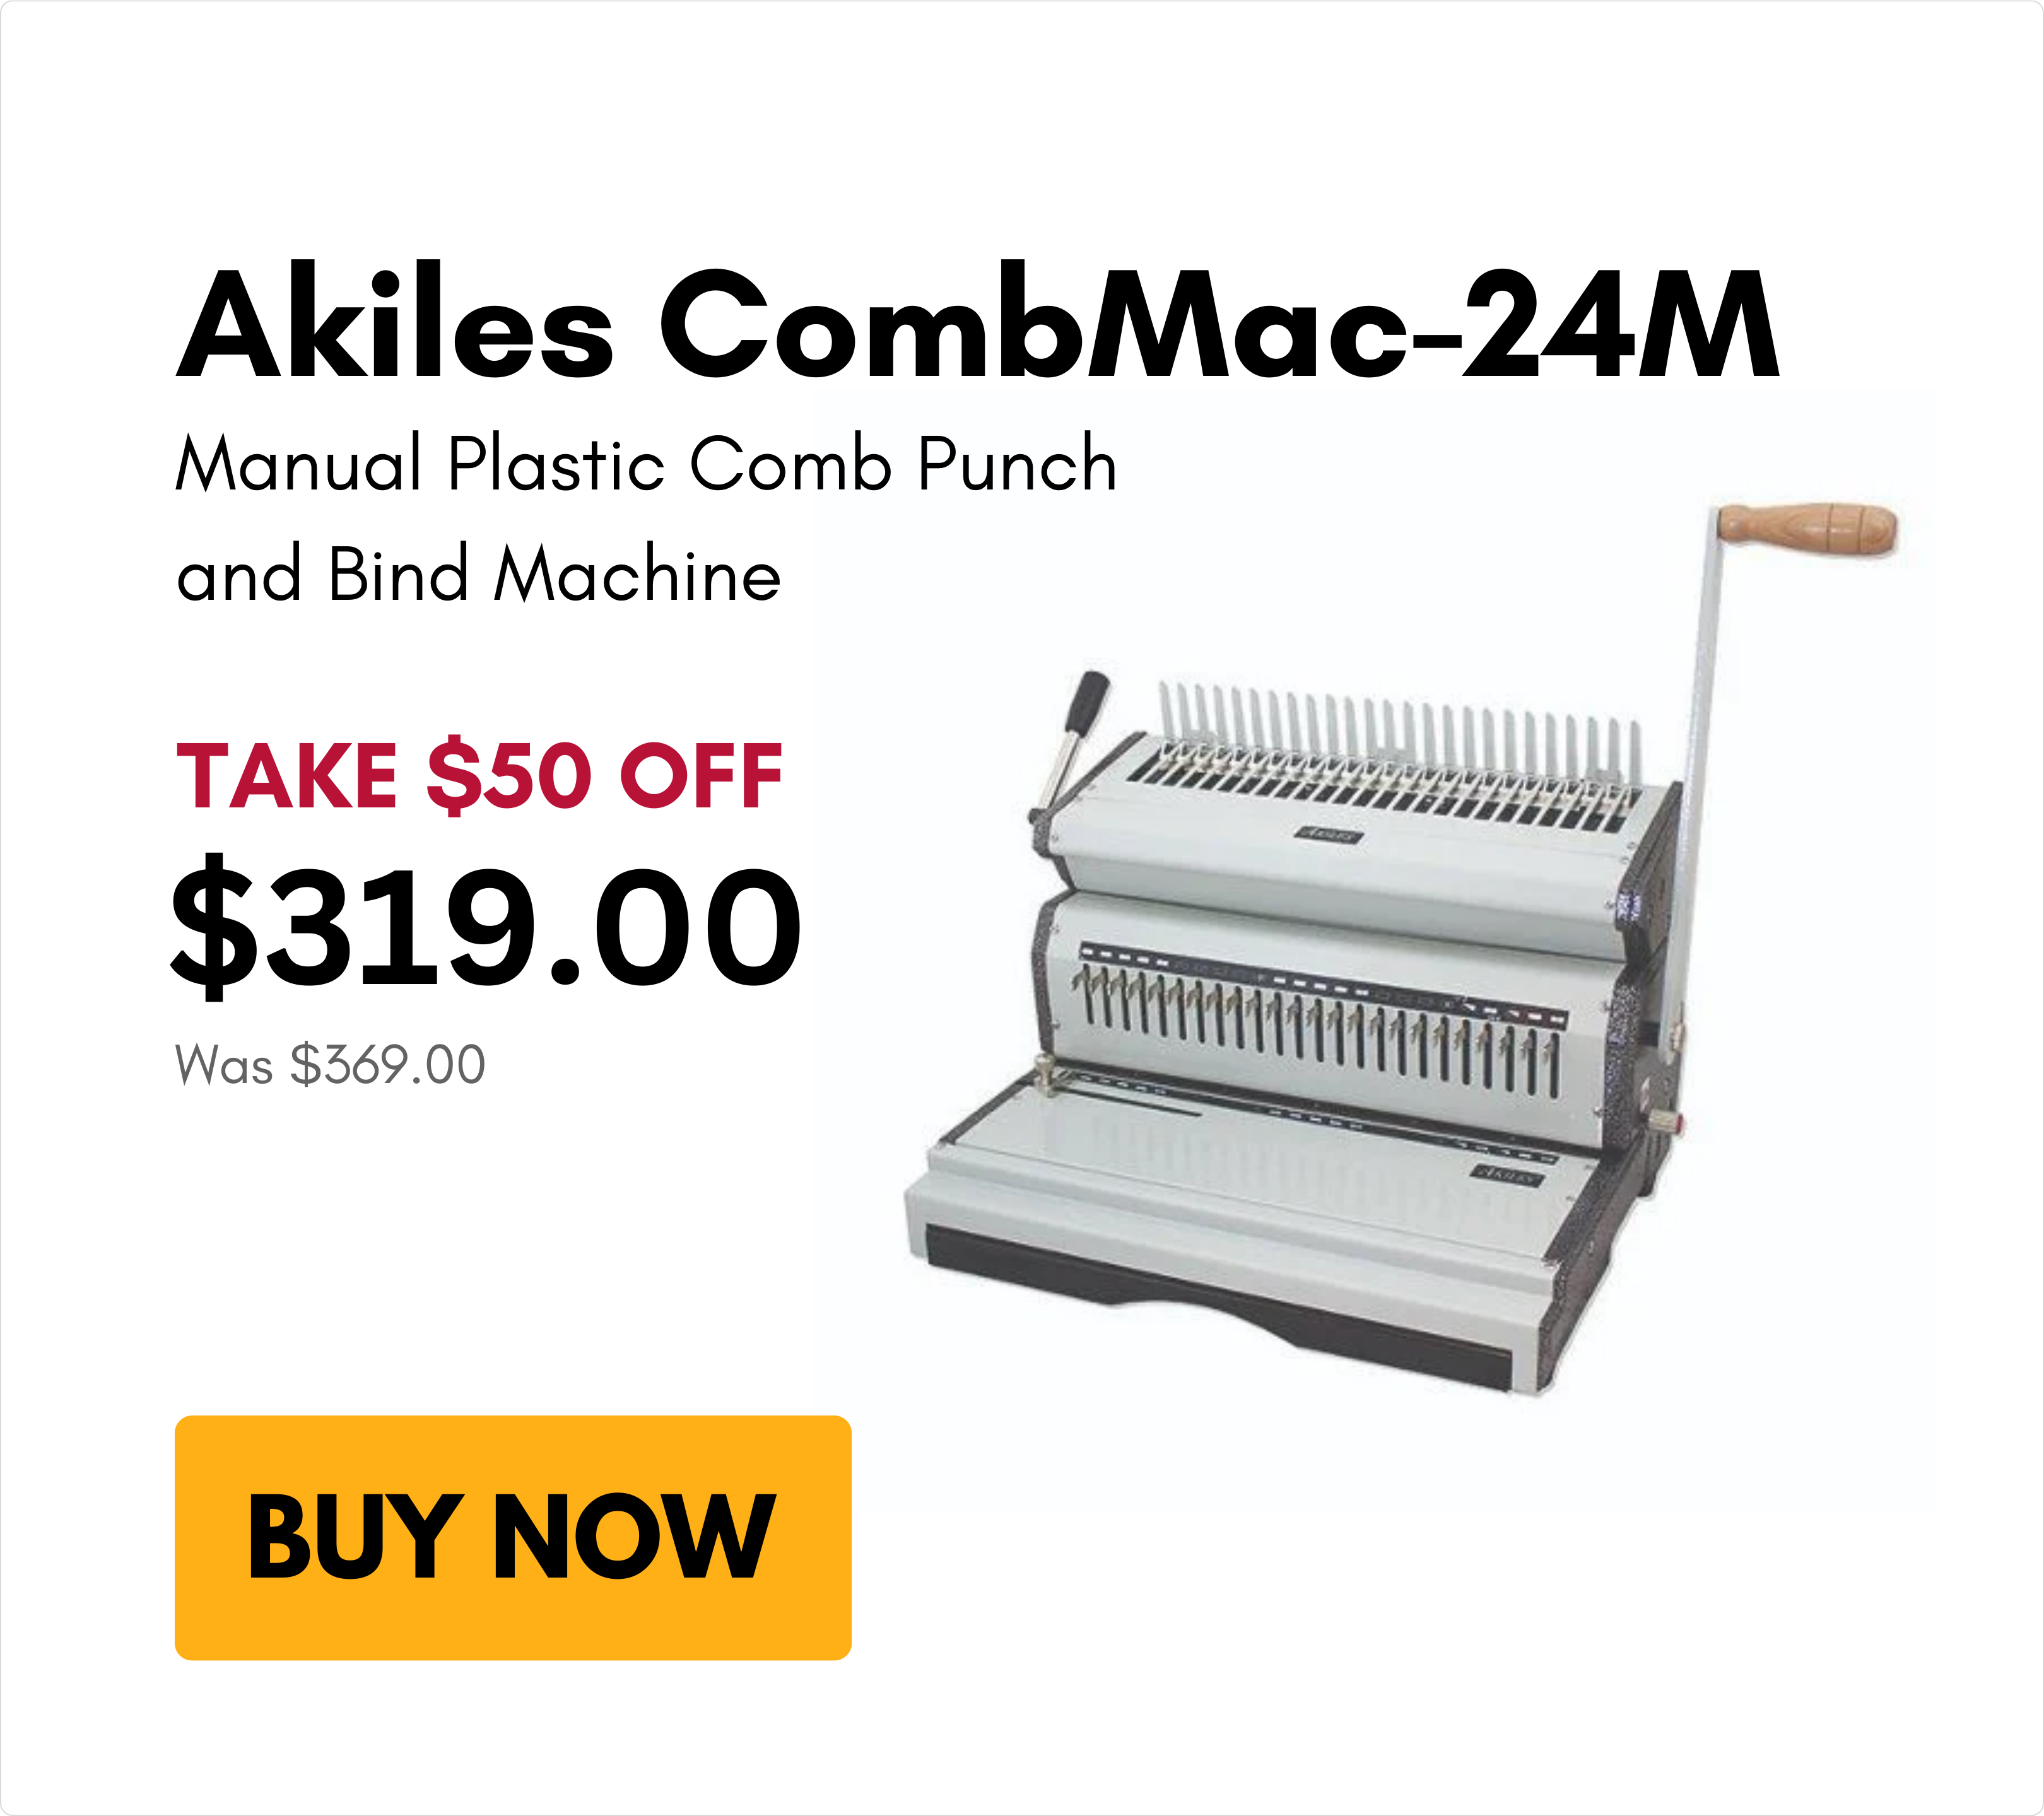 Akiles CombMac-24M Manual Plastic Comb Punch And Bind Machine